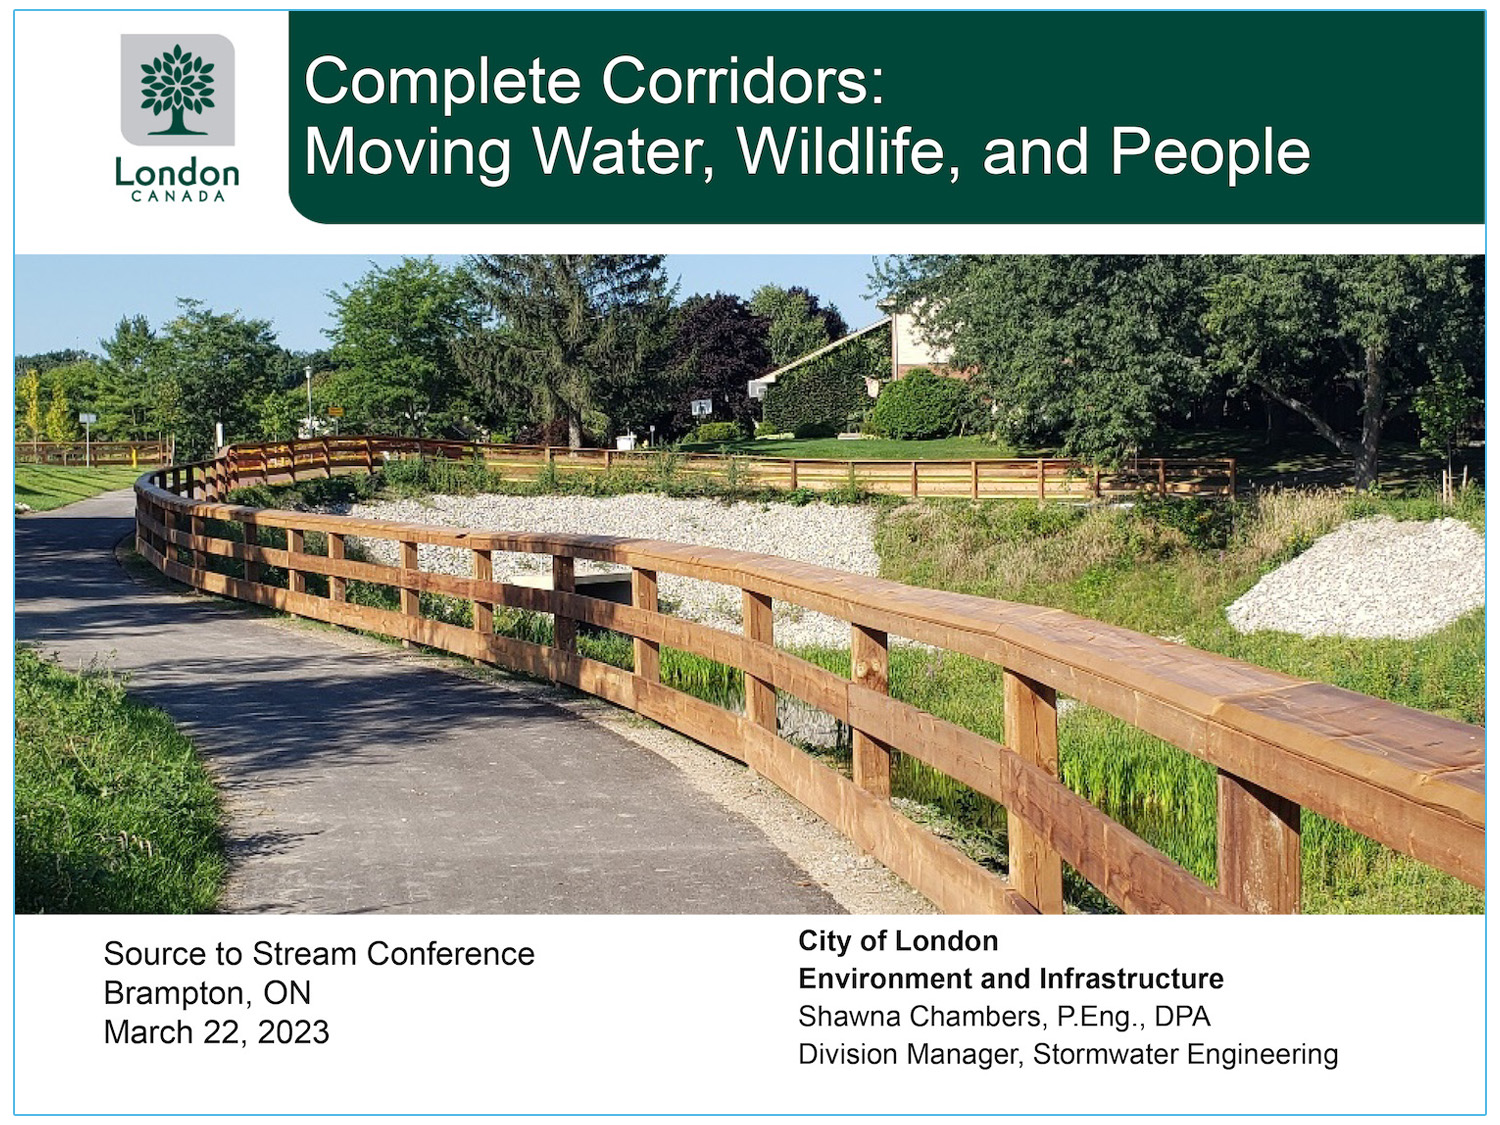 Complete Corridors – Moving Water, Wildlife, and People - Presenter - Shawna Chambers, City of London